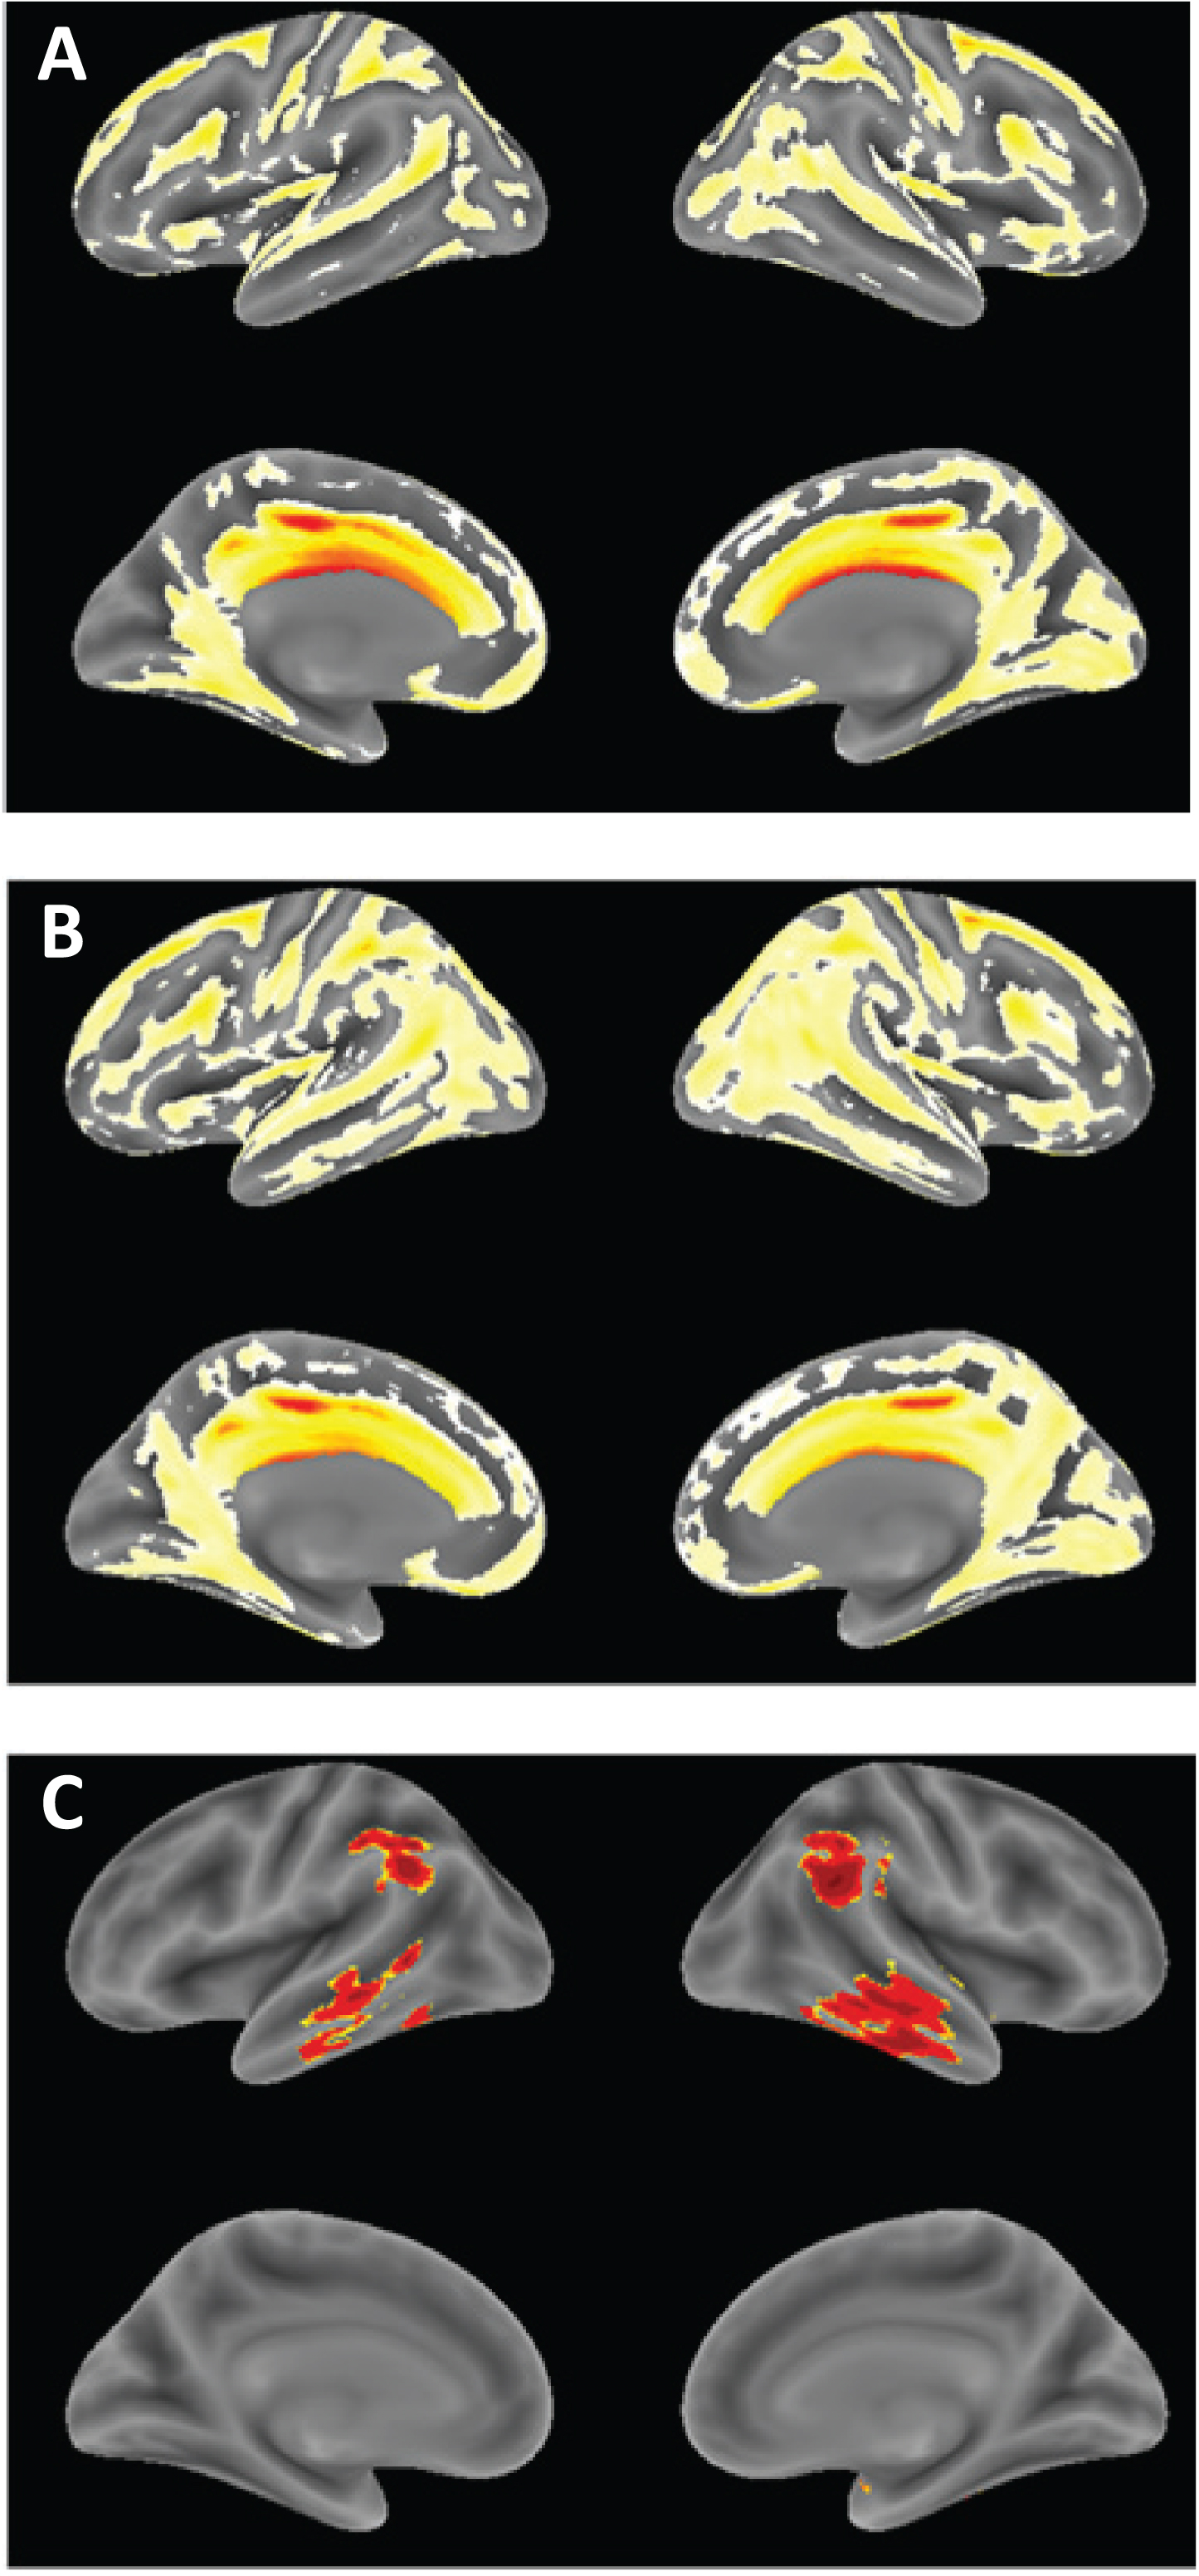 Voxel-based morphometric comparison showing regions of greater atrophy in patients receiving LMTM as monotherapy [N = 157] (A) or as add-on to approved treatments for AD [N = 610], (B) in TRx-237-005 compared with elderly controls [N = 244] from the ongoing Aberdeen birth cohort studies [23, 26], controlled for age, sex and total intracranial volume of each individual. (C) Voxel-based morphometric comparison of monotherapy and add-on patients in TRx-237-005. Data are displayed at a significance threshold corrected for family-wise error at the whole brain level at p < 0.05.